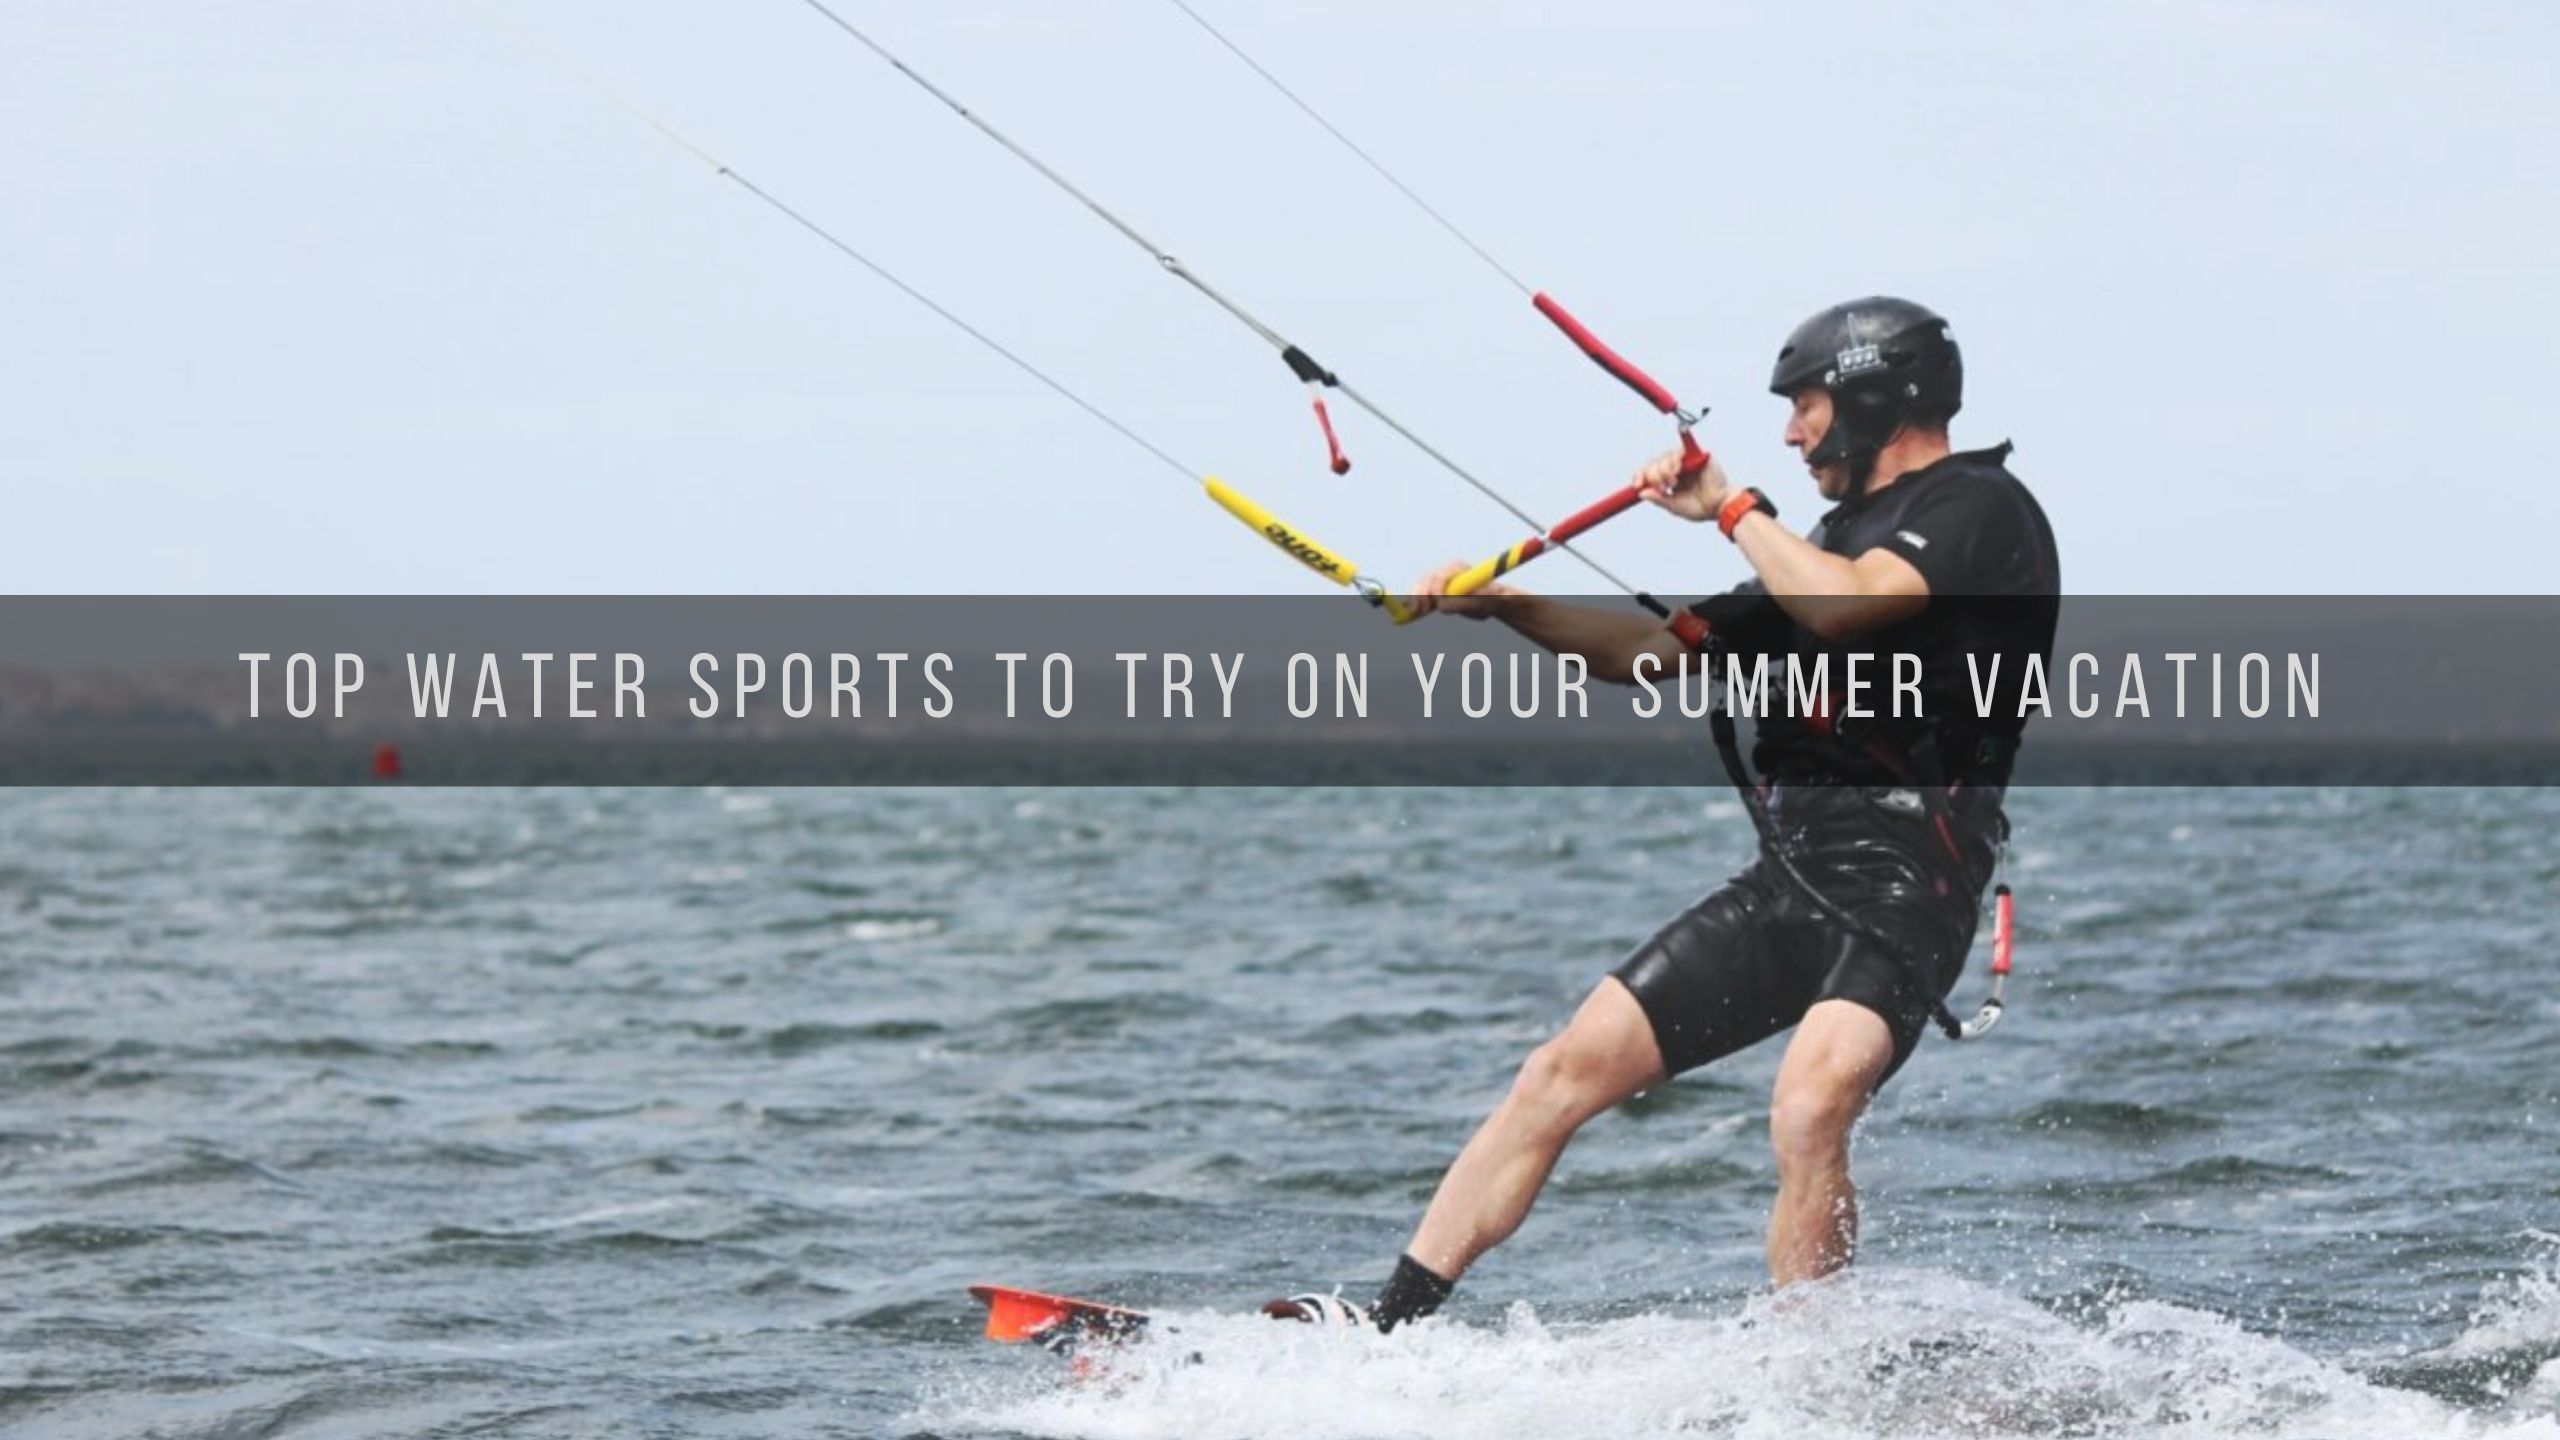 Top Water Sports to Try in Summer Vacation